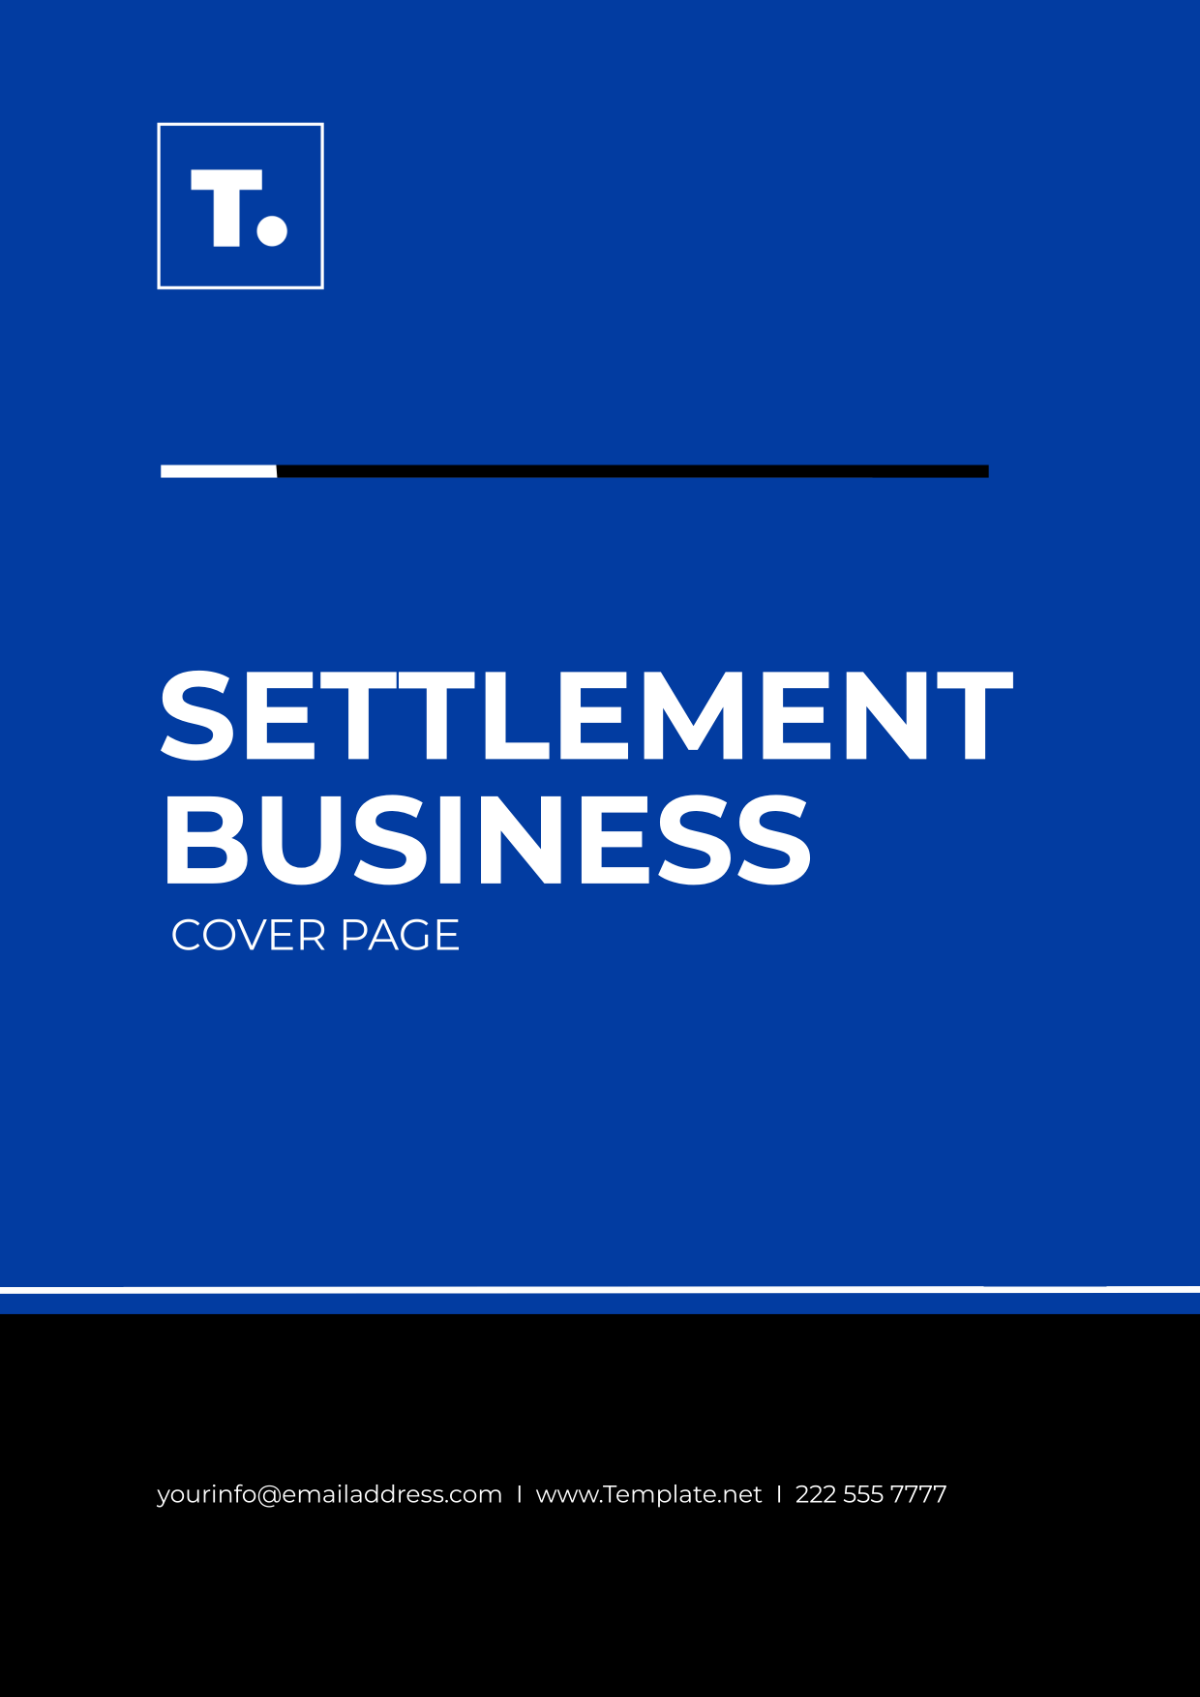 Settlement Business Cover Page